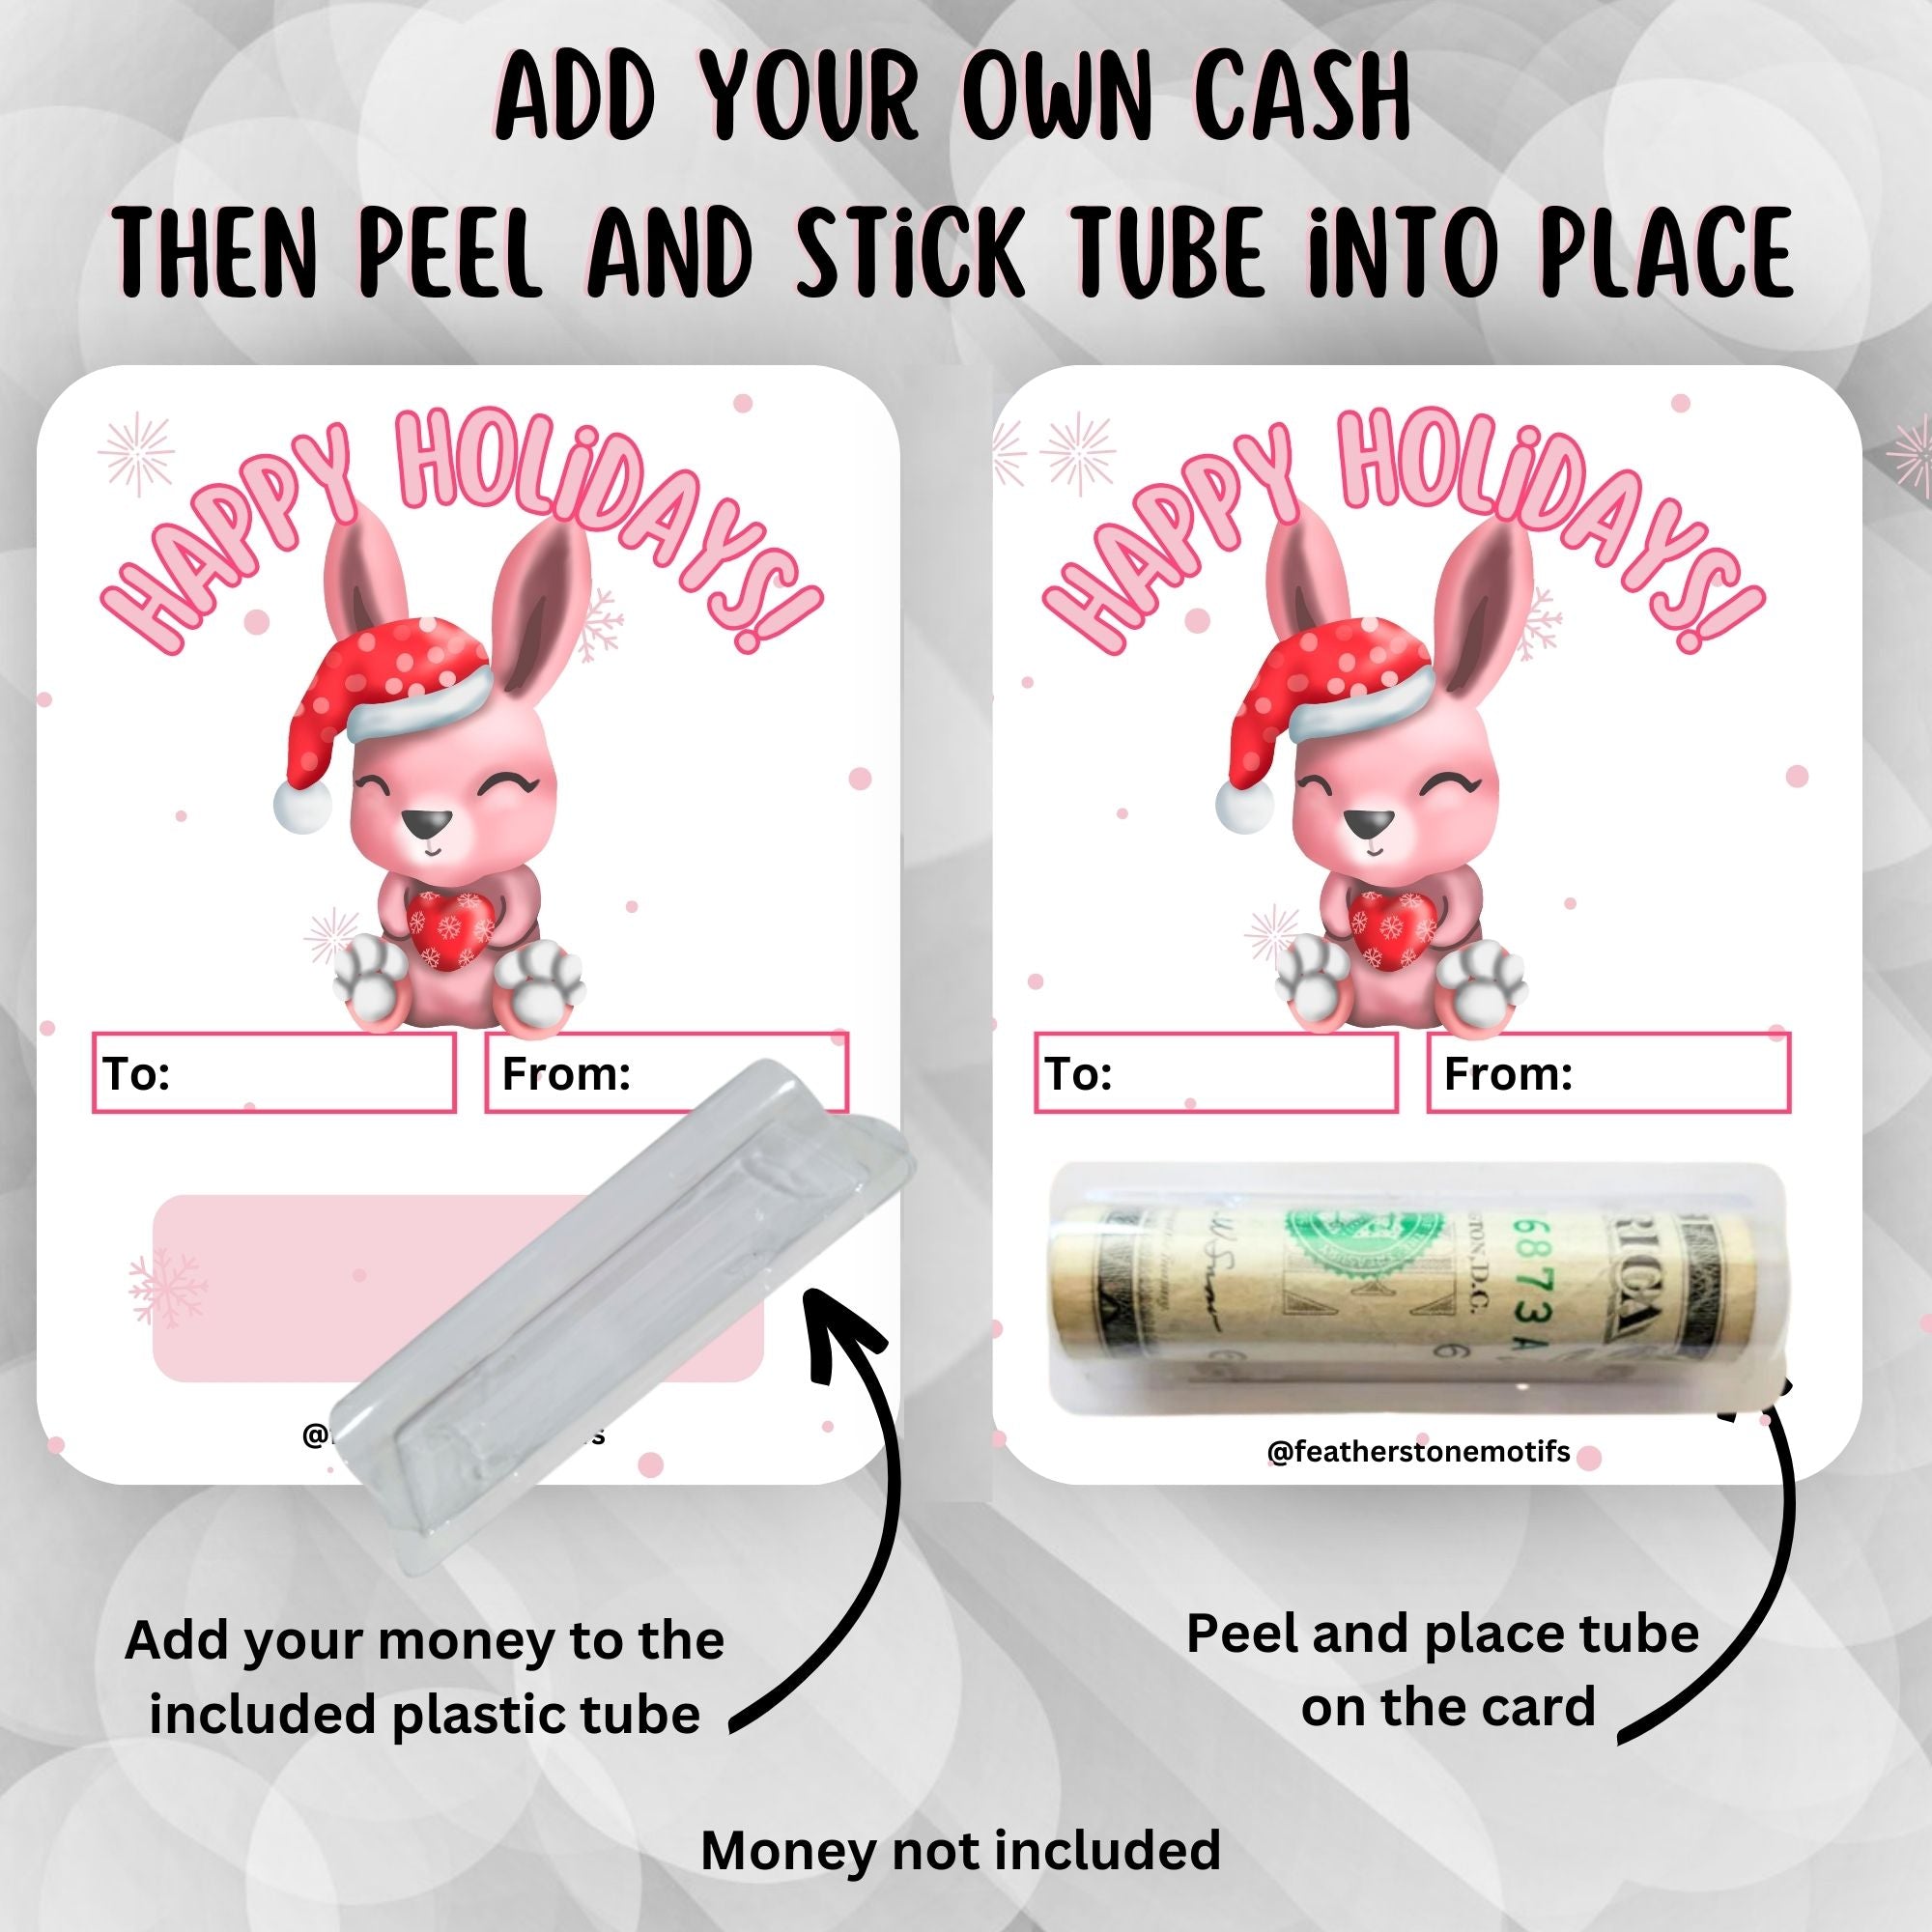 This image shows how to attach the money tube to the Holiday Bunny 2 Money Card.